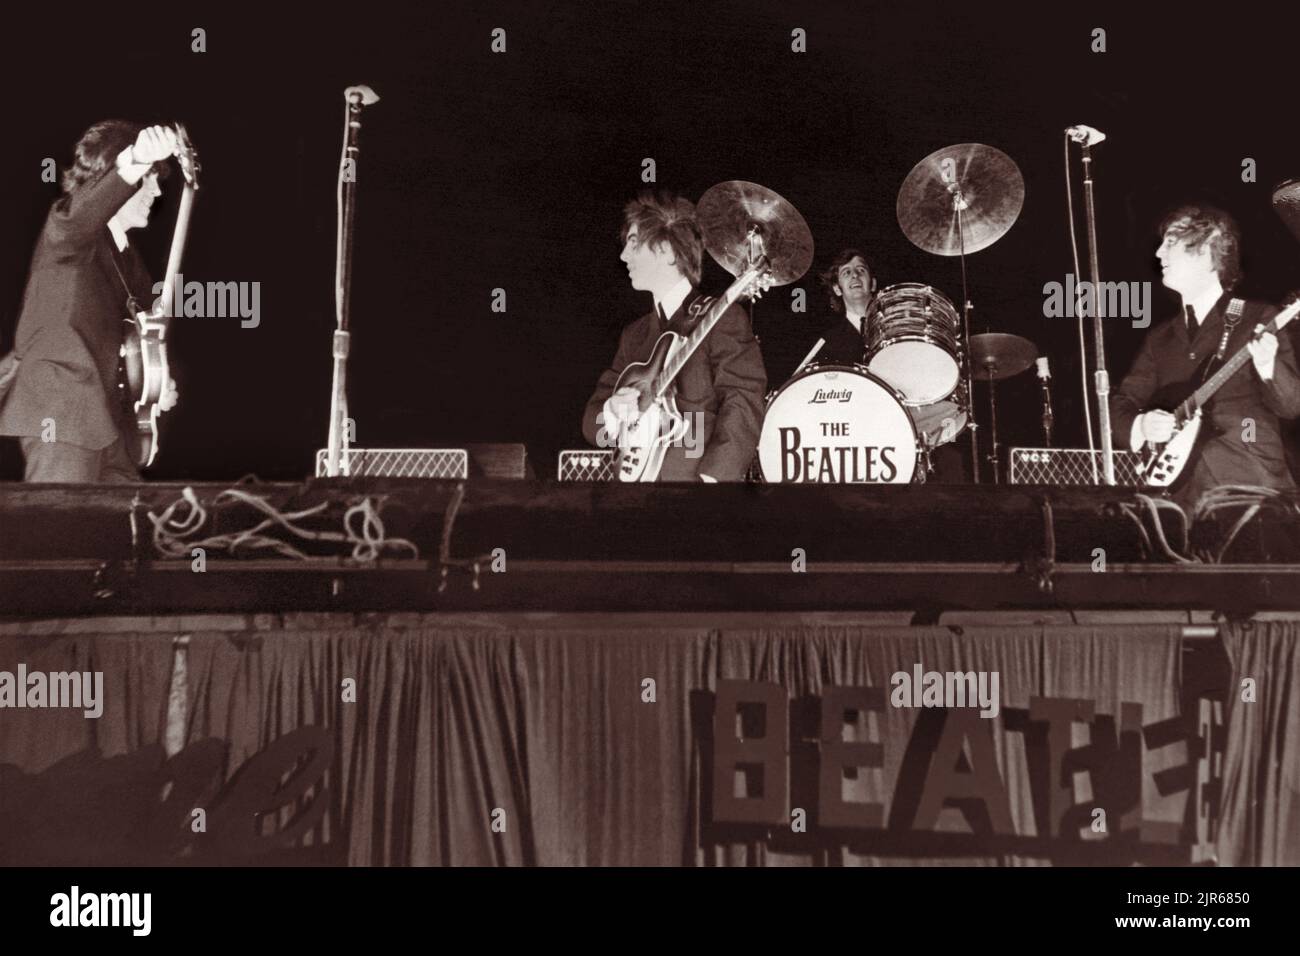 The Beatles on stage at the Gator Bowl in Jacksonville, Florida, on September 11, 1964. Hurricane Dora had struck Jacksonville the previous day and remaining strong winds, gusting to 45 mph, required Ringo Starr's drums to be nailed to the stage and caused the cardboard 'Beatles' lettering on the side of the stage to eventually be ripped away. (USA) Stock Photo